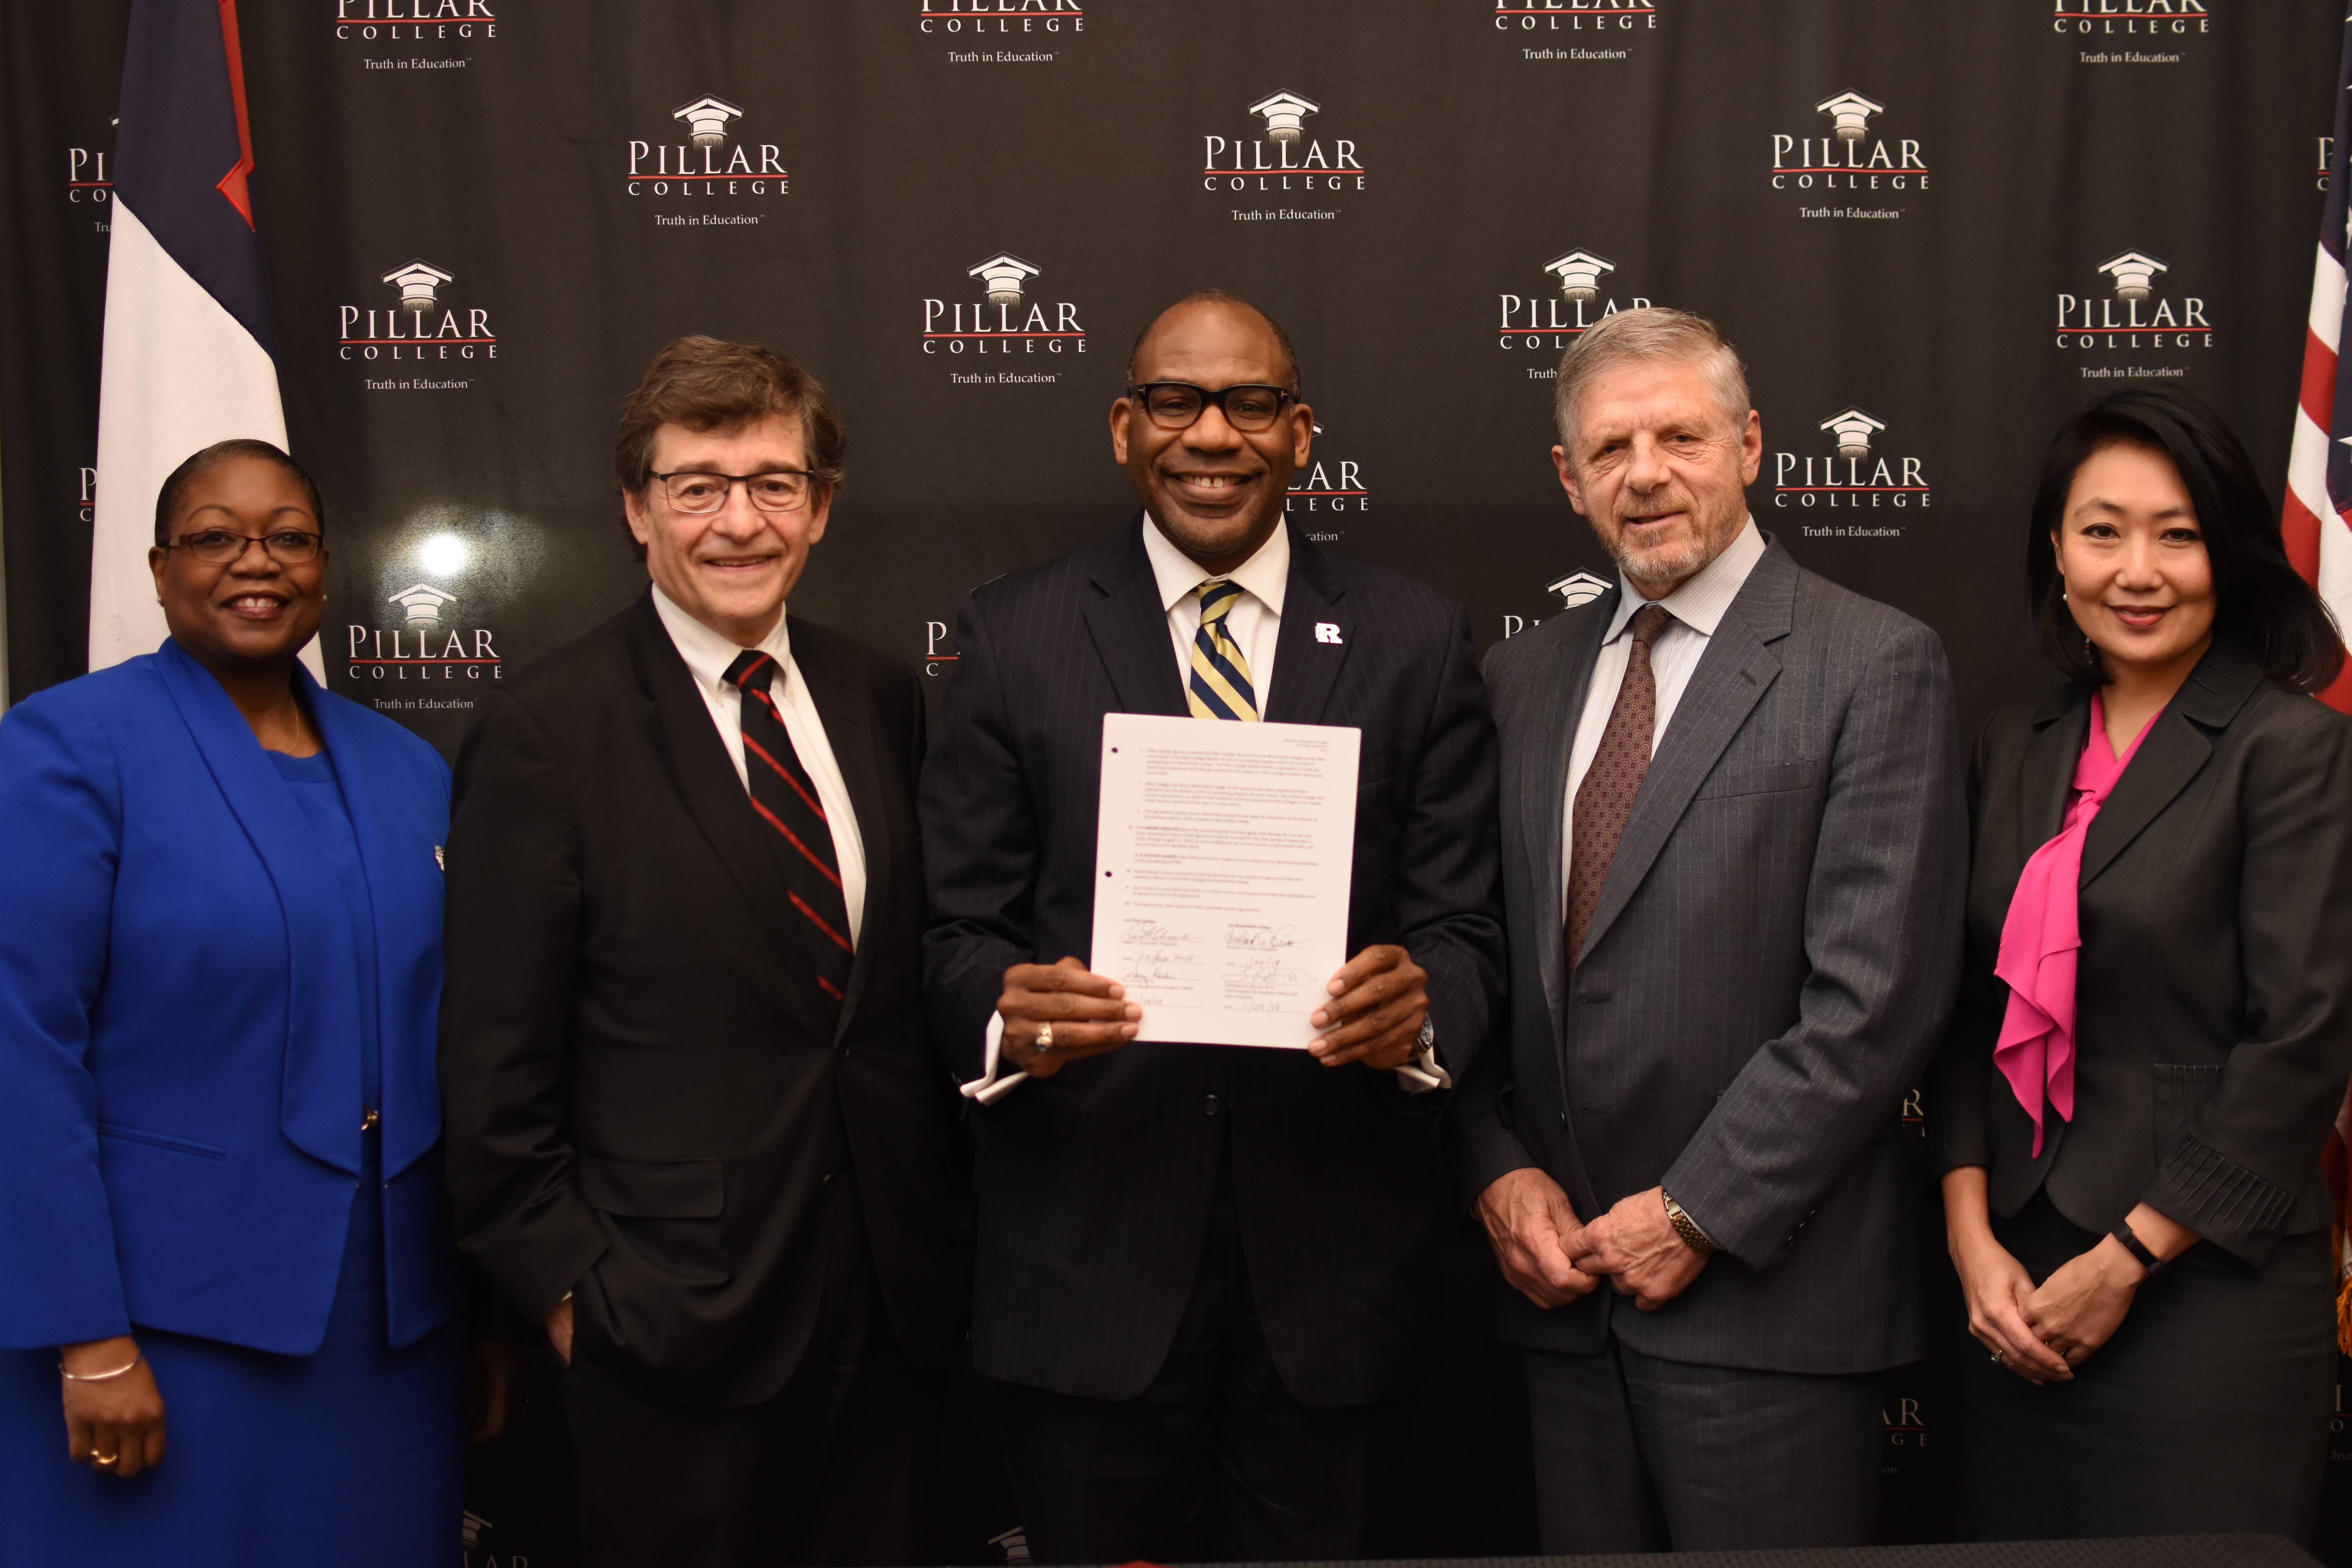 Two Newark City of Learning Collaborative partners enter agreement